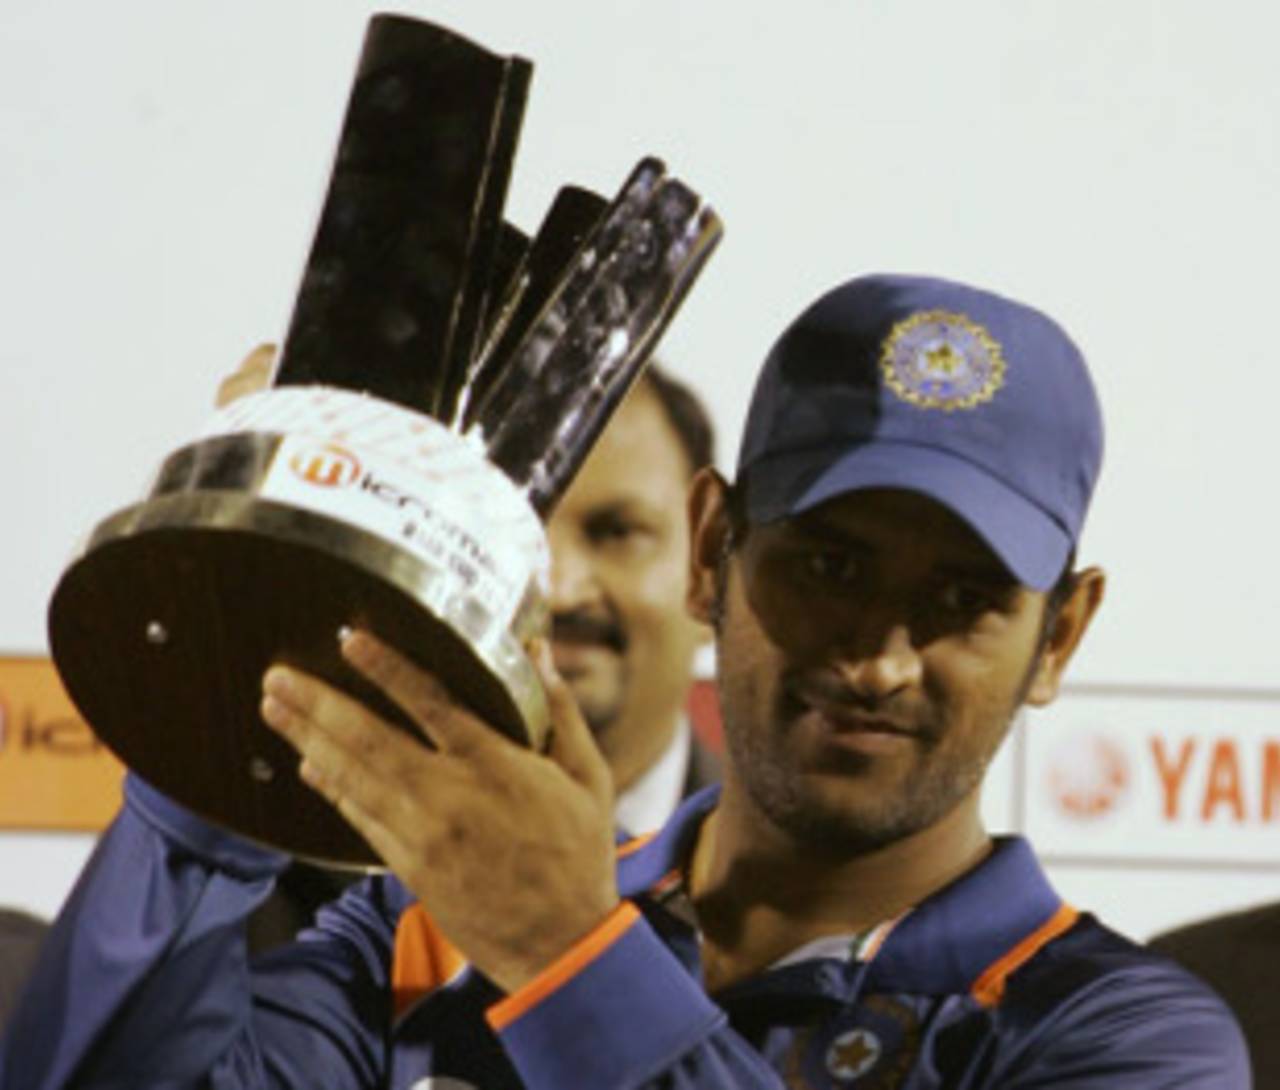 The Asia Cup triumph added to MS Dhoni's impressive CV, but unless organisers do their homework the tournament will remain unexceptional for fans&nbsp;&nbsp;&bull;&nbsp;&nbsp;Associated Press